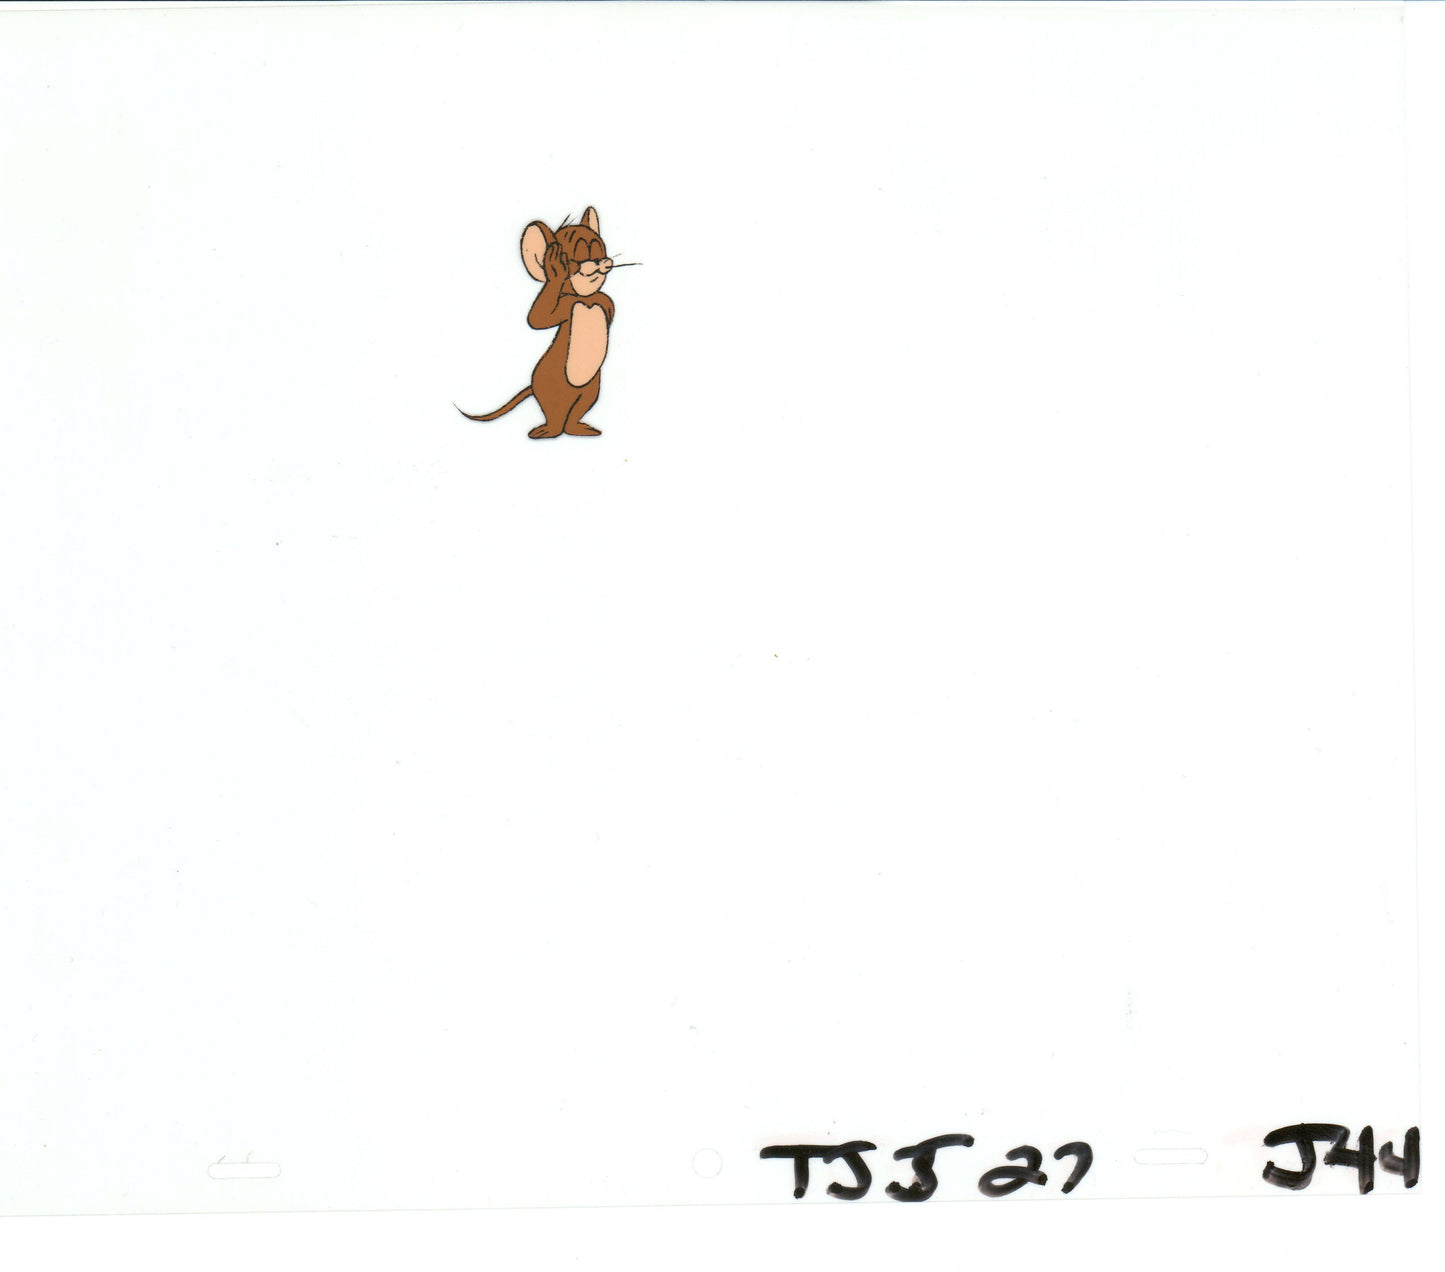 Tom & Jerry Original Production Animation Cel from Filmation 1980-82 b4459